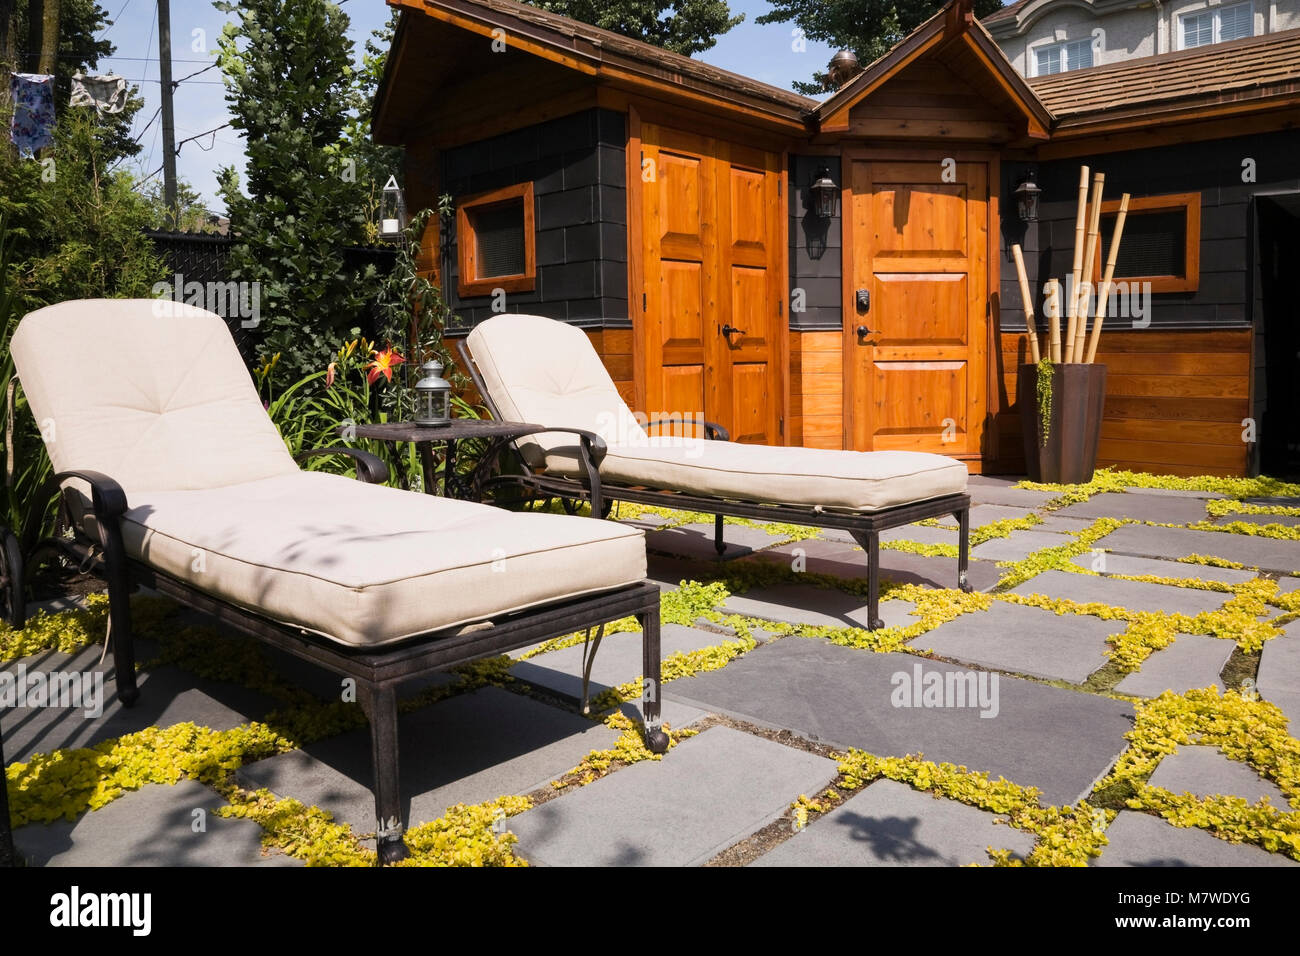 Long chairs on patio stones next to a storage shed in a landscaped residential backyard in summer. Stock Photo